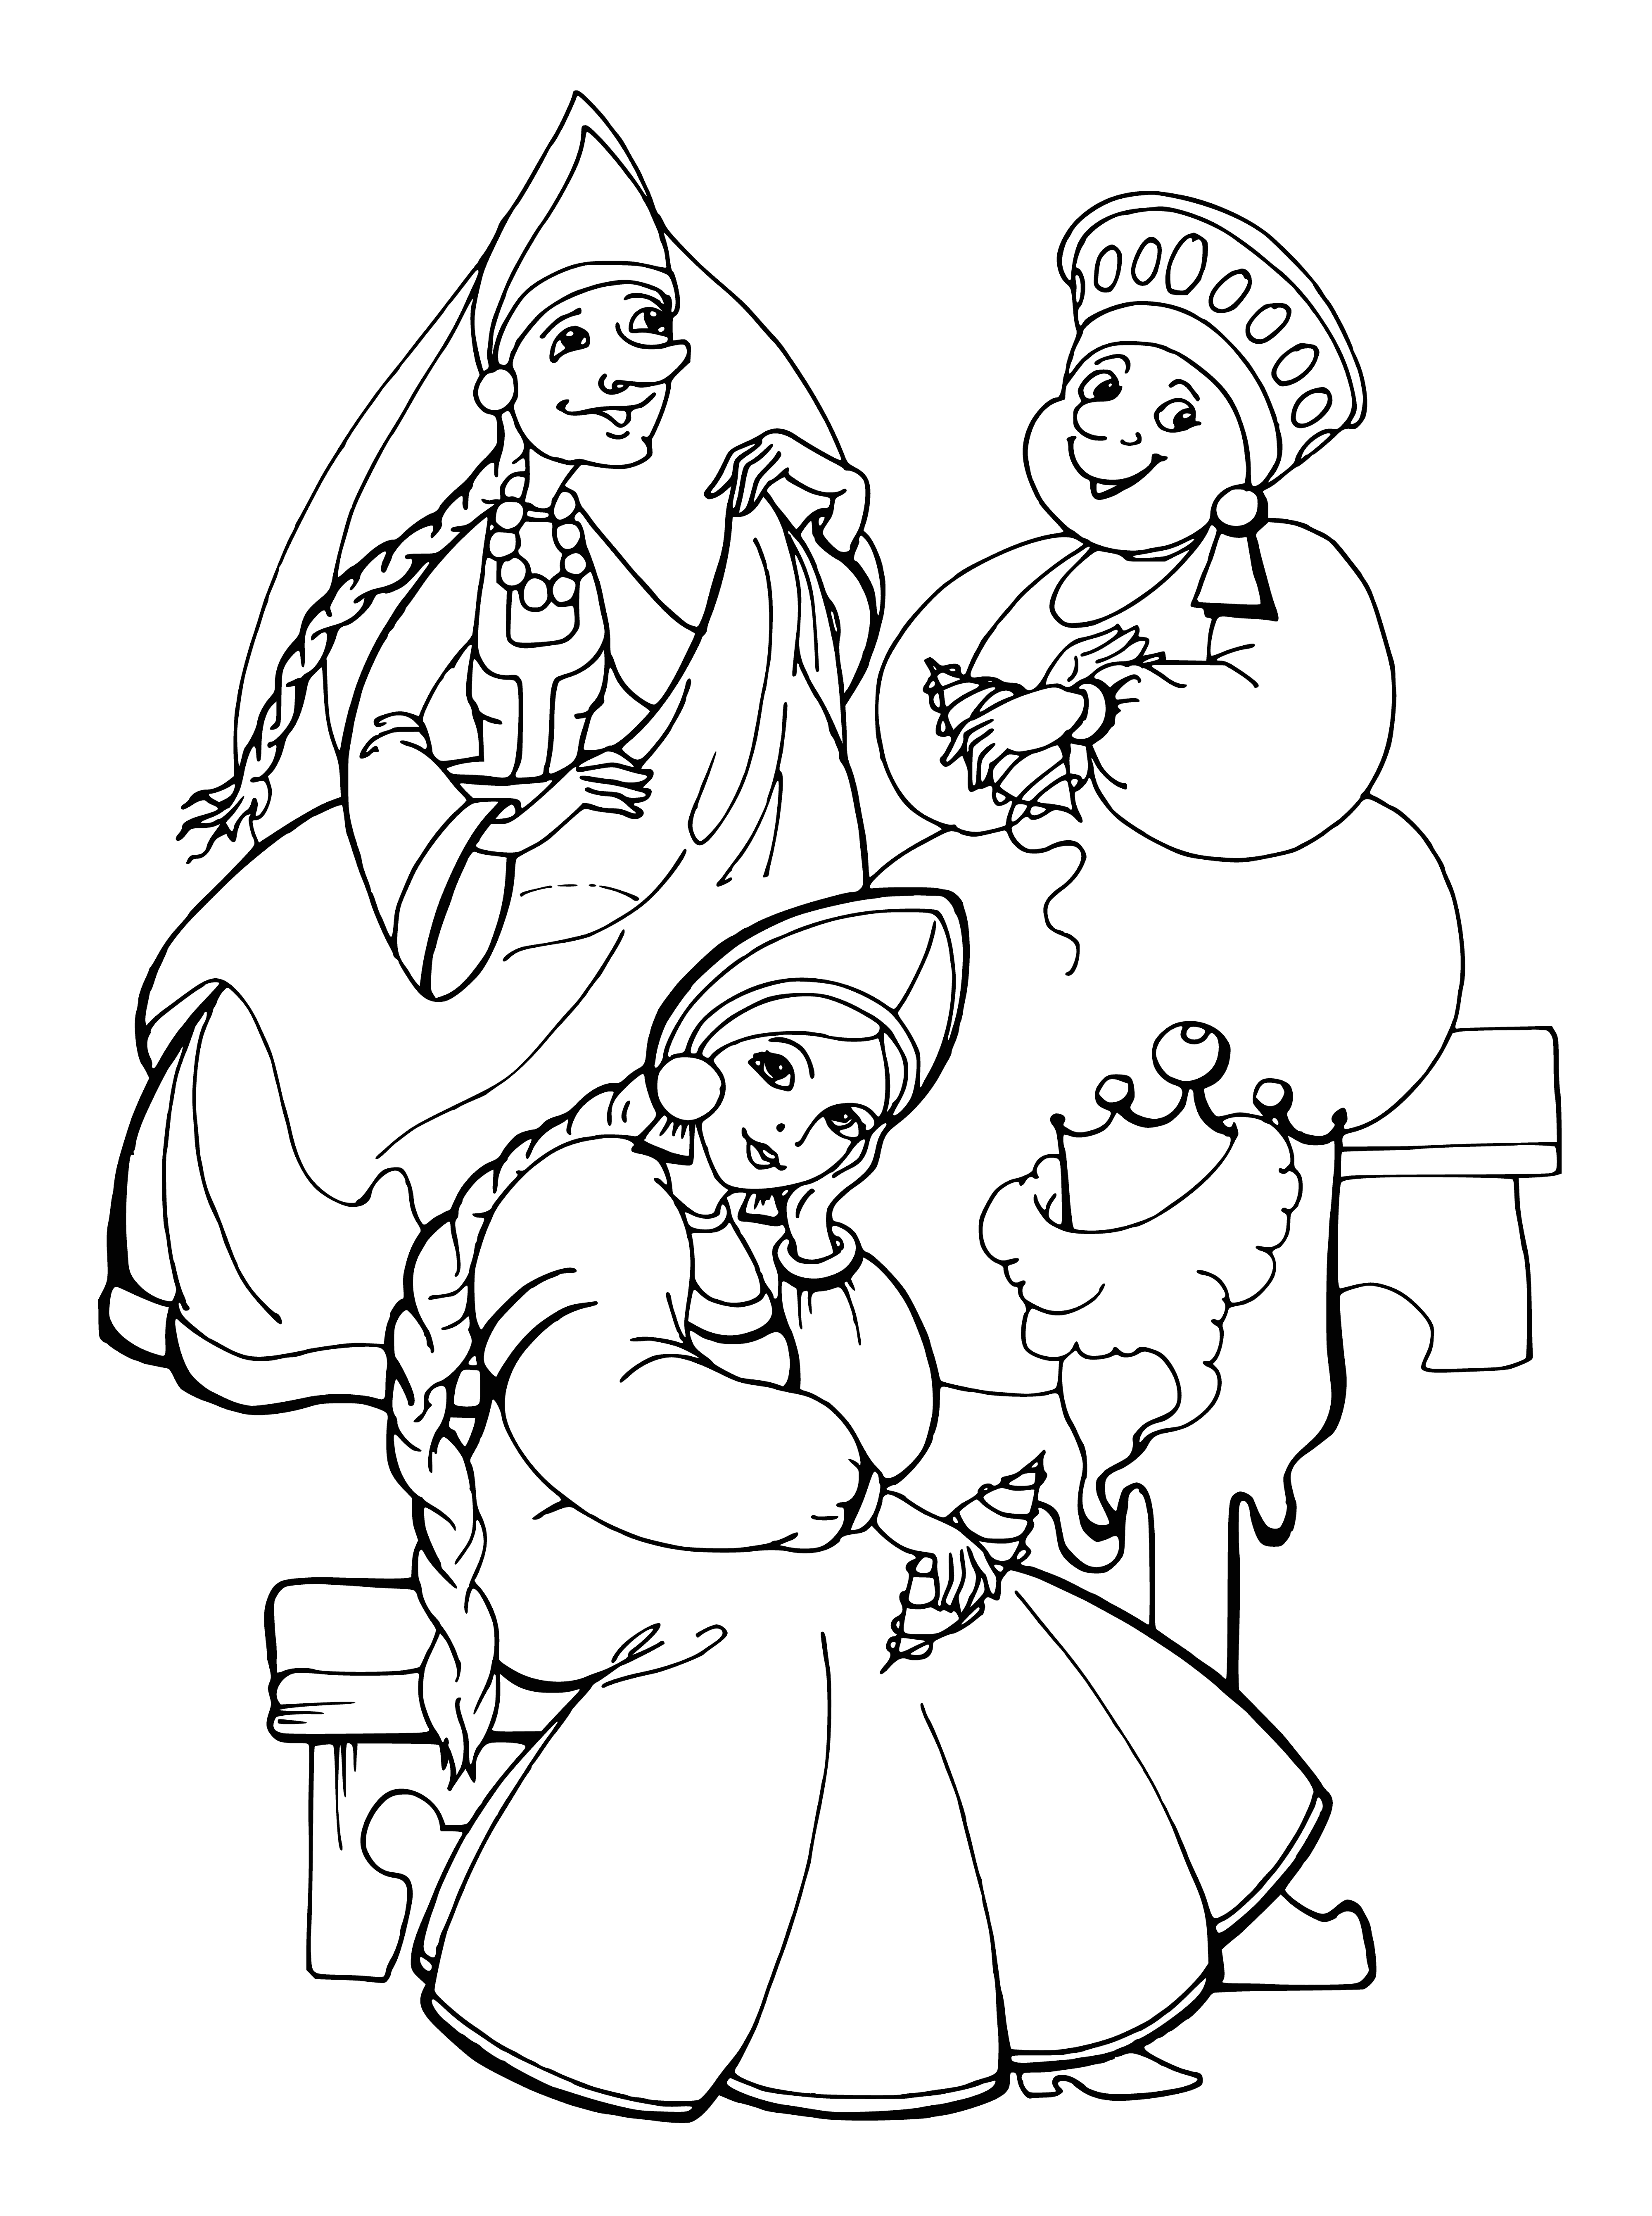 coloring page: 3 sisters: serious, gentle, playful expressions. White & pink dresses, ranging from tight to loose hair.